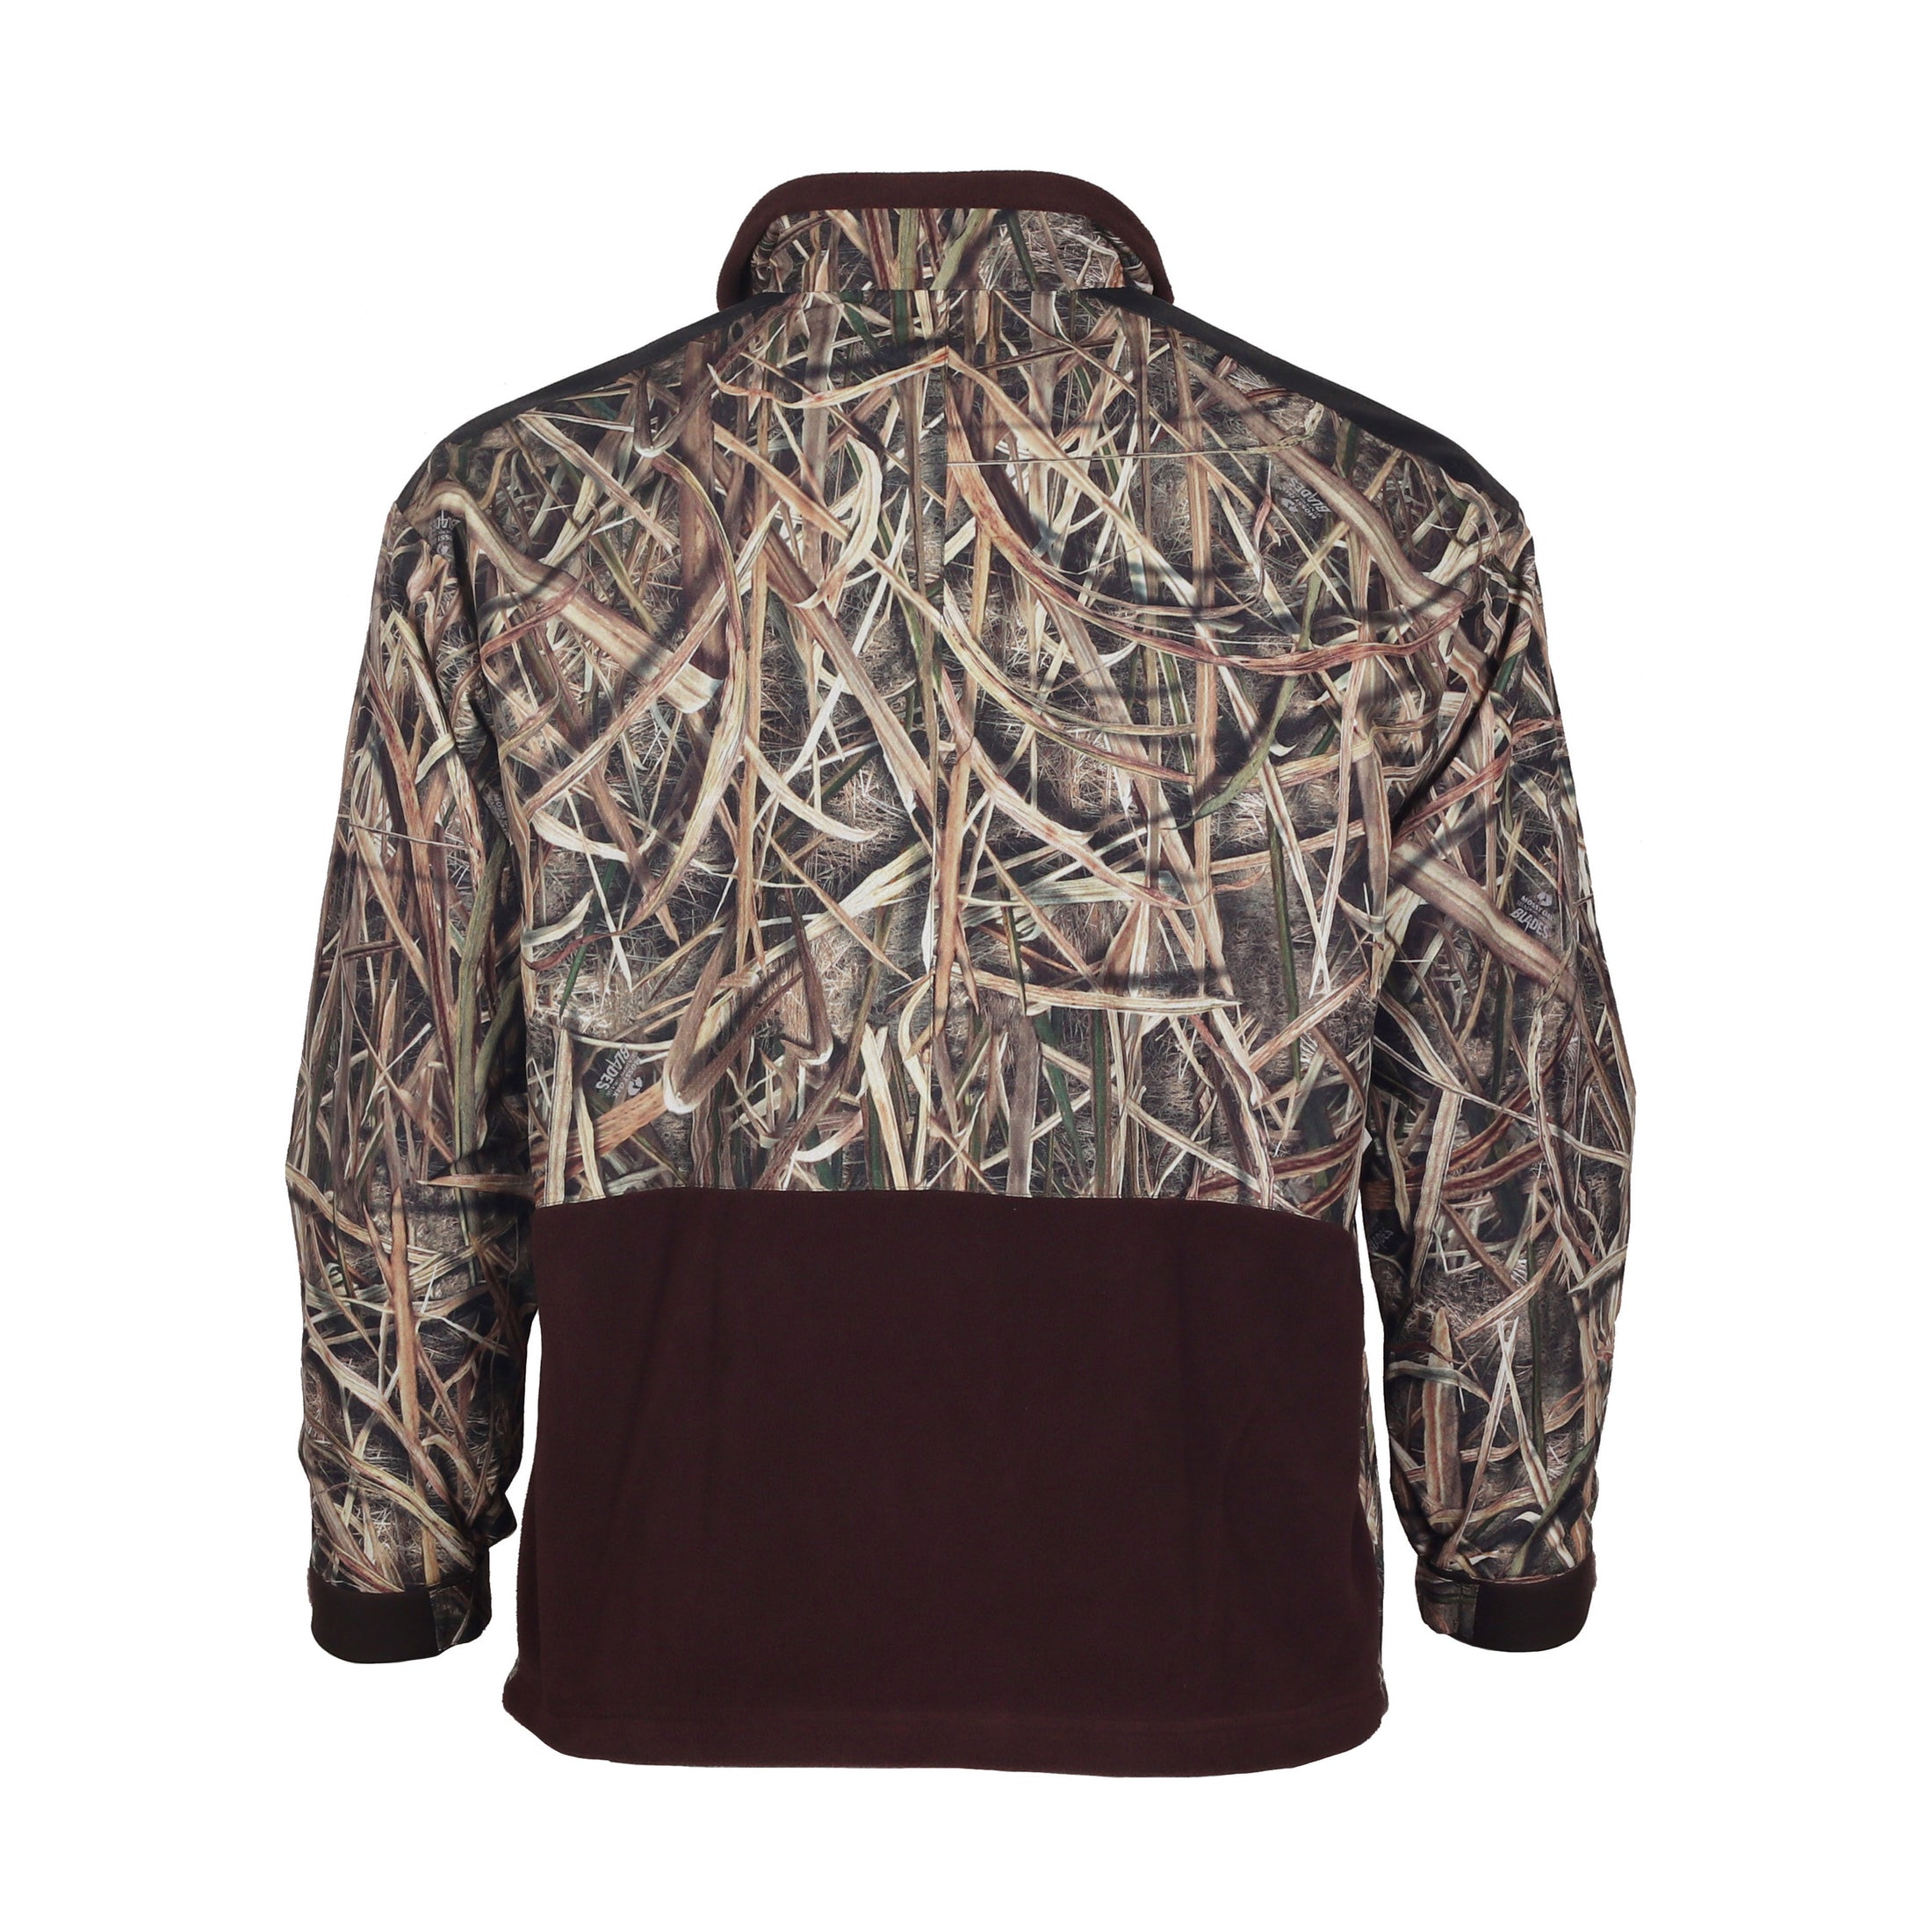 gamehide Marsh Lord Pullover back (mossy oak shadow grass blades)